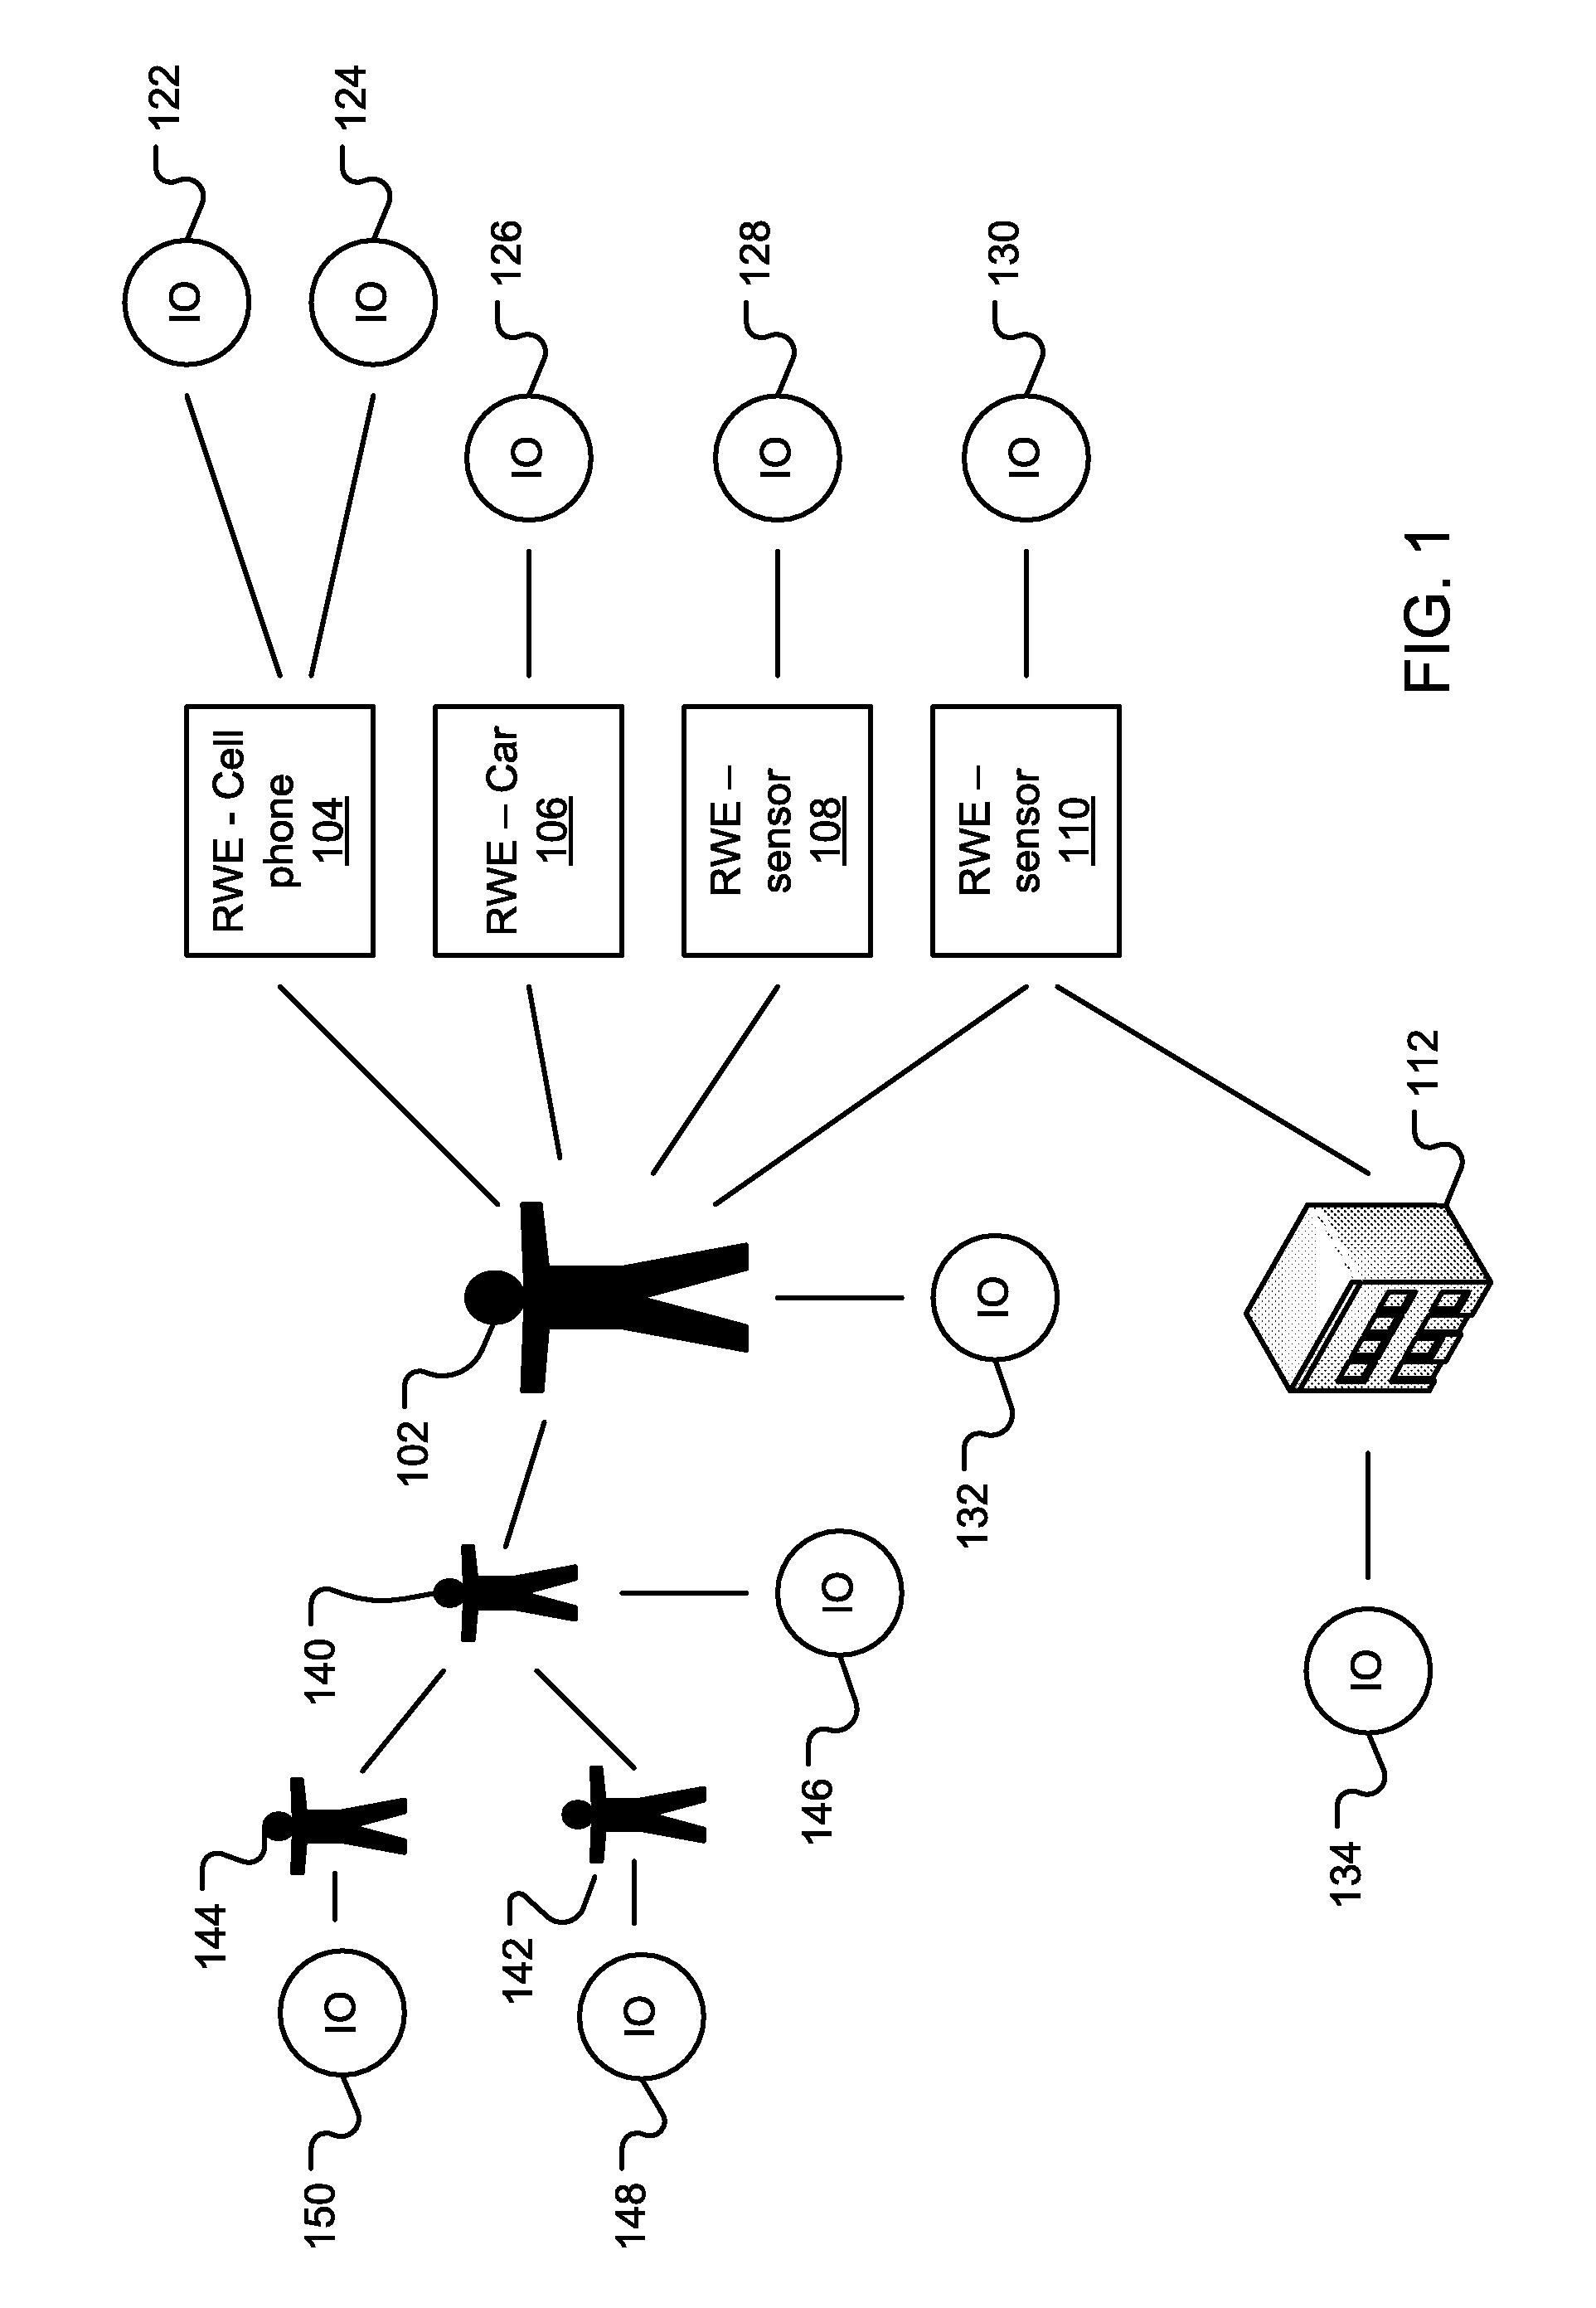 System and method for socially aware identity manager